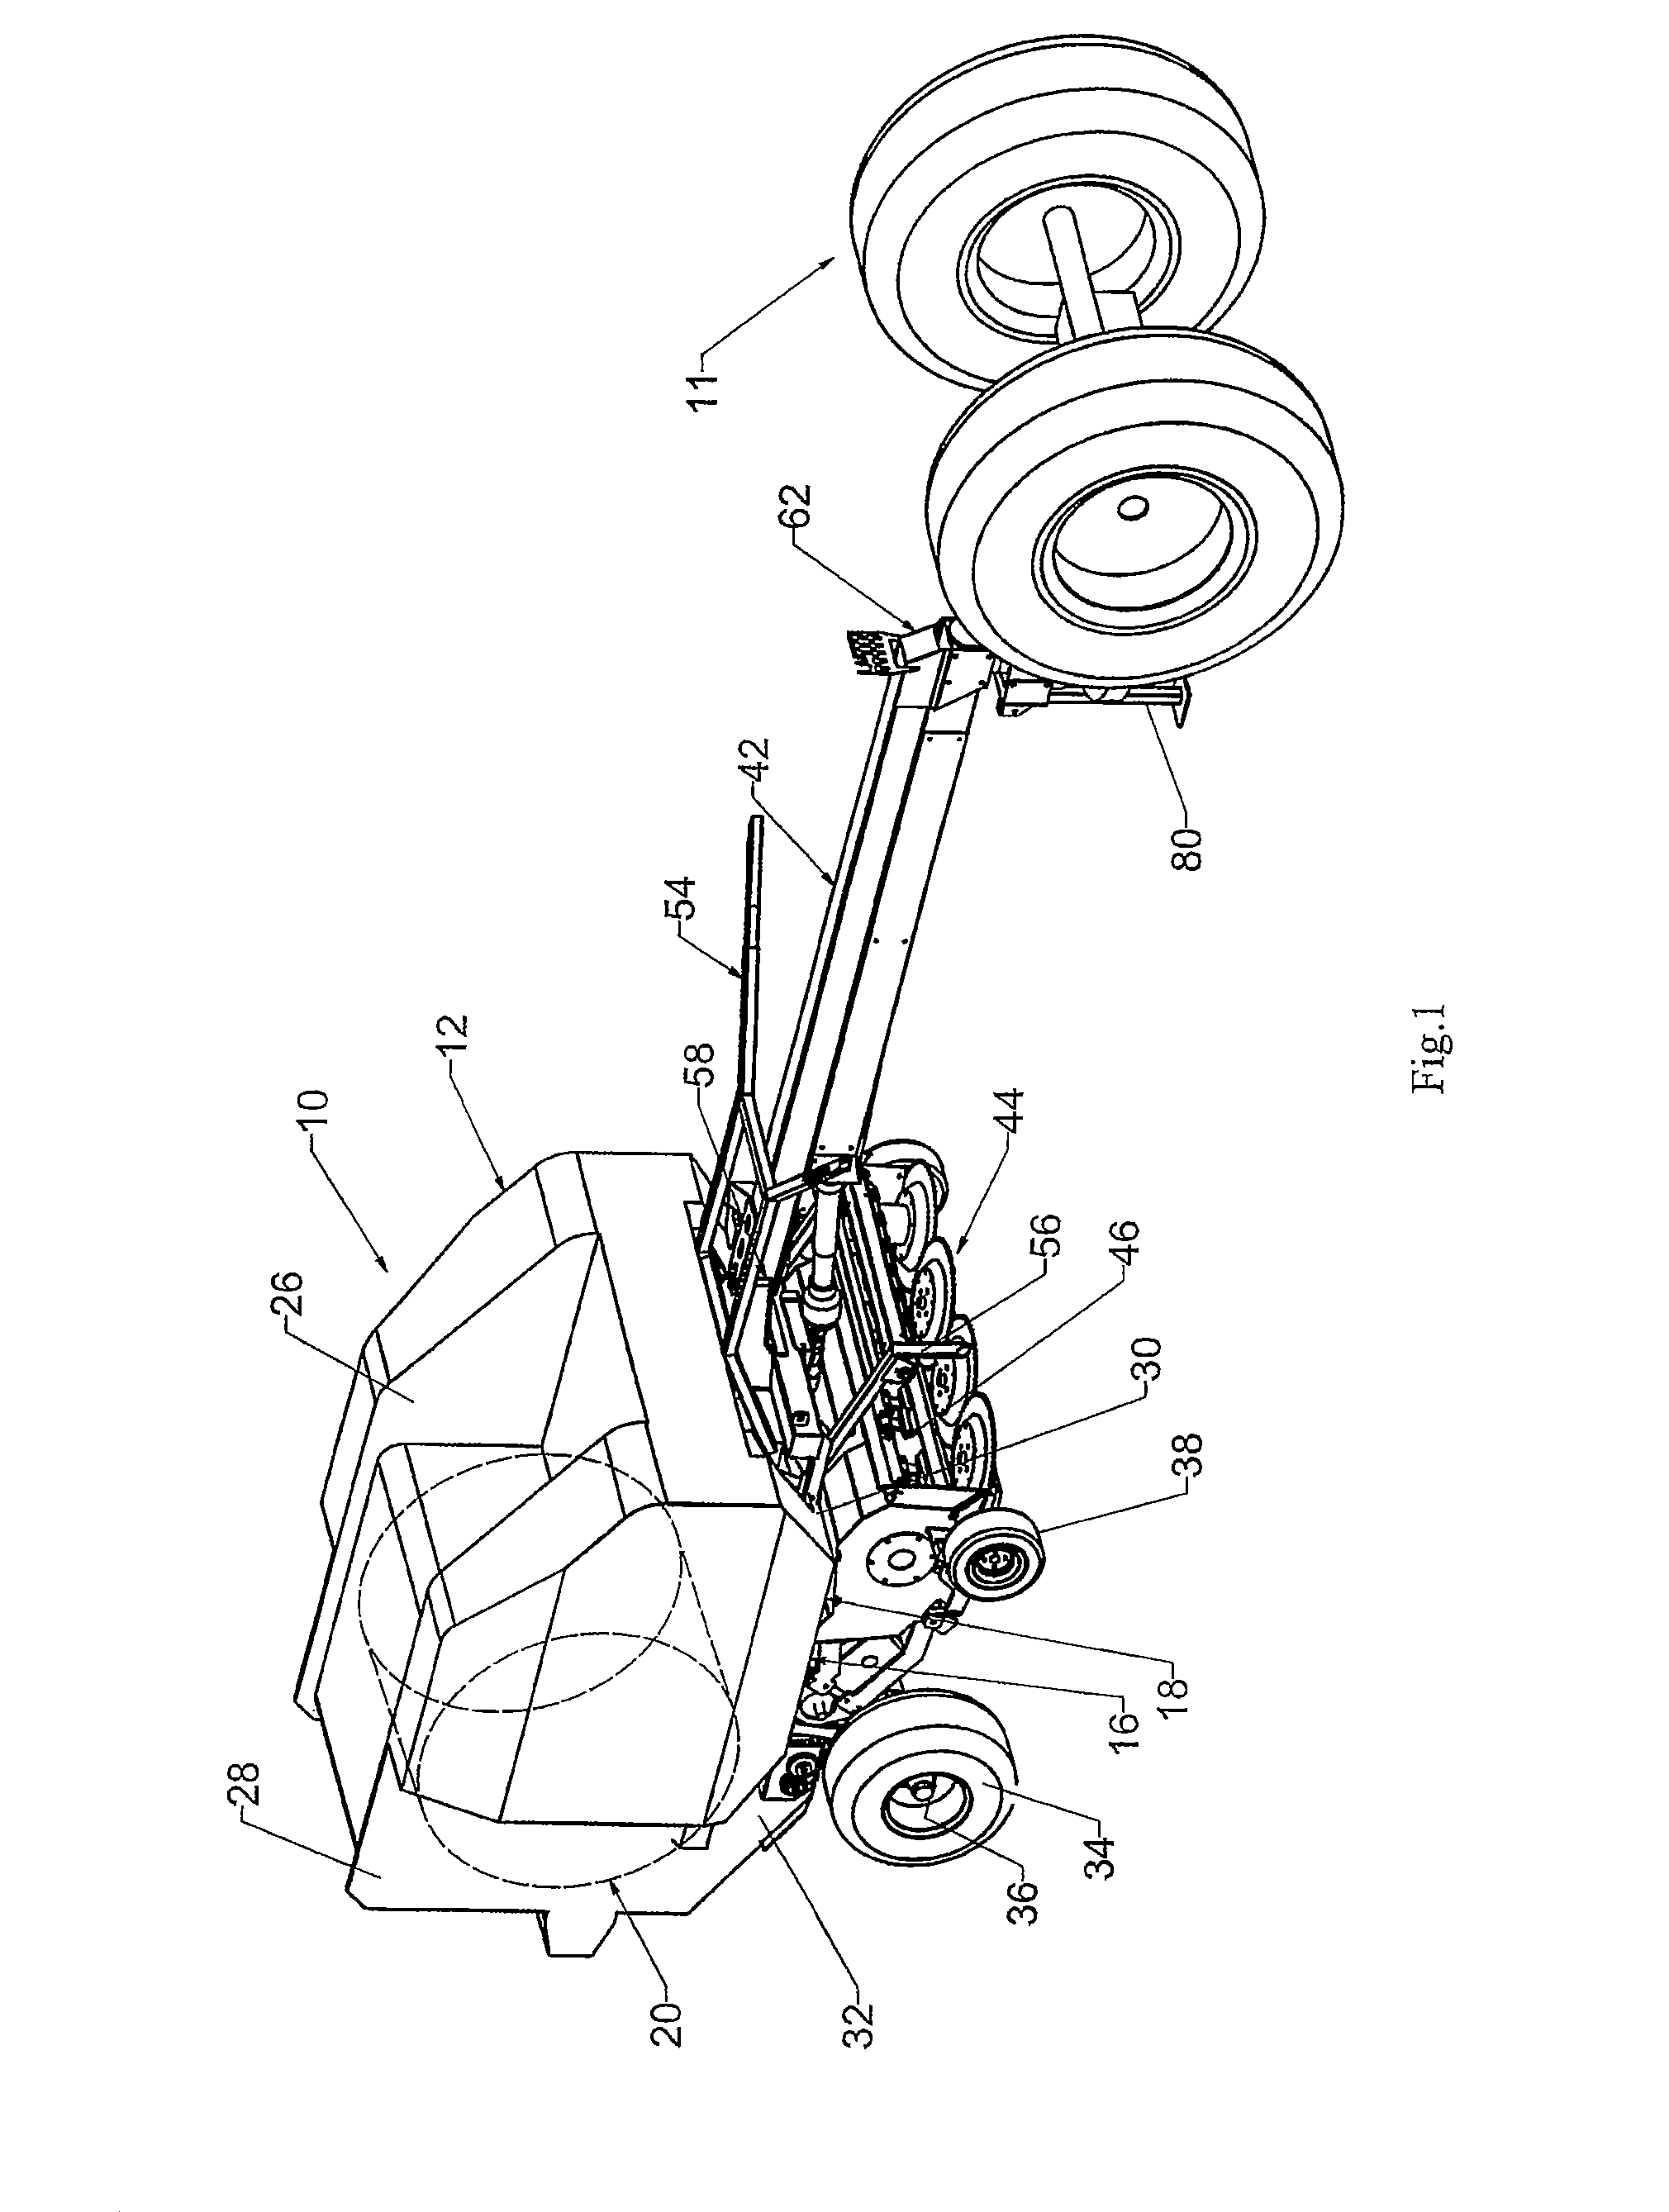 Device and method for harvesting woody crops